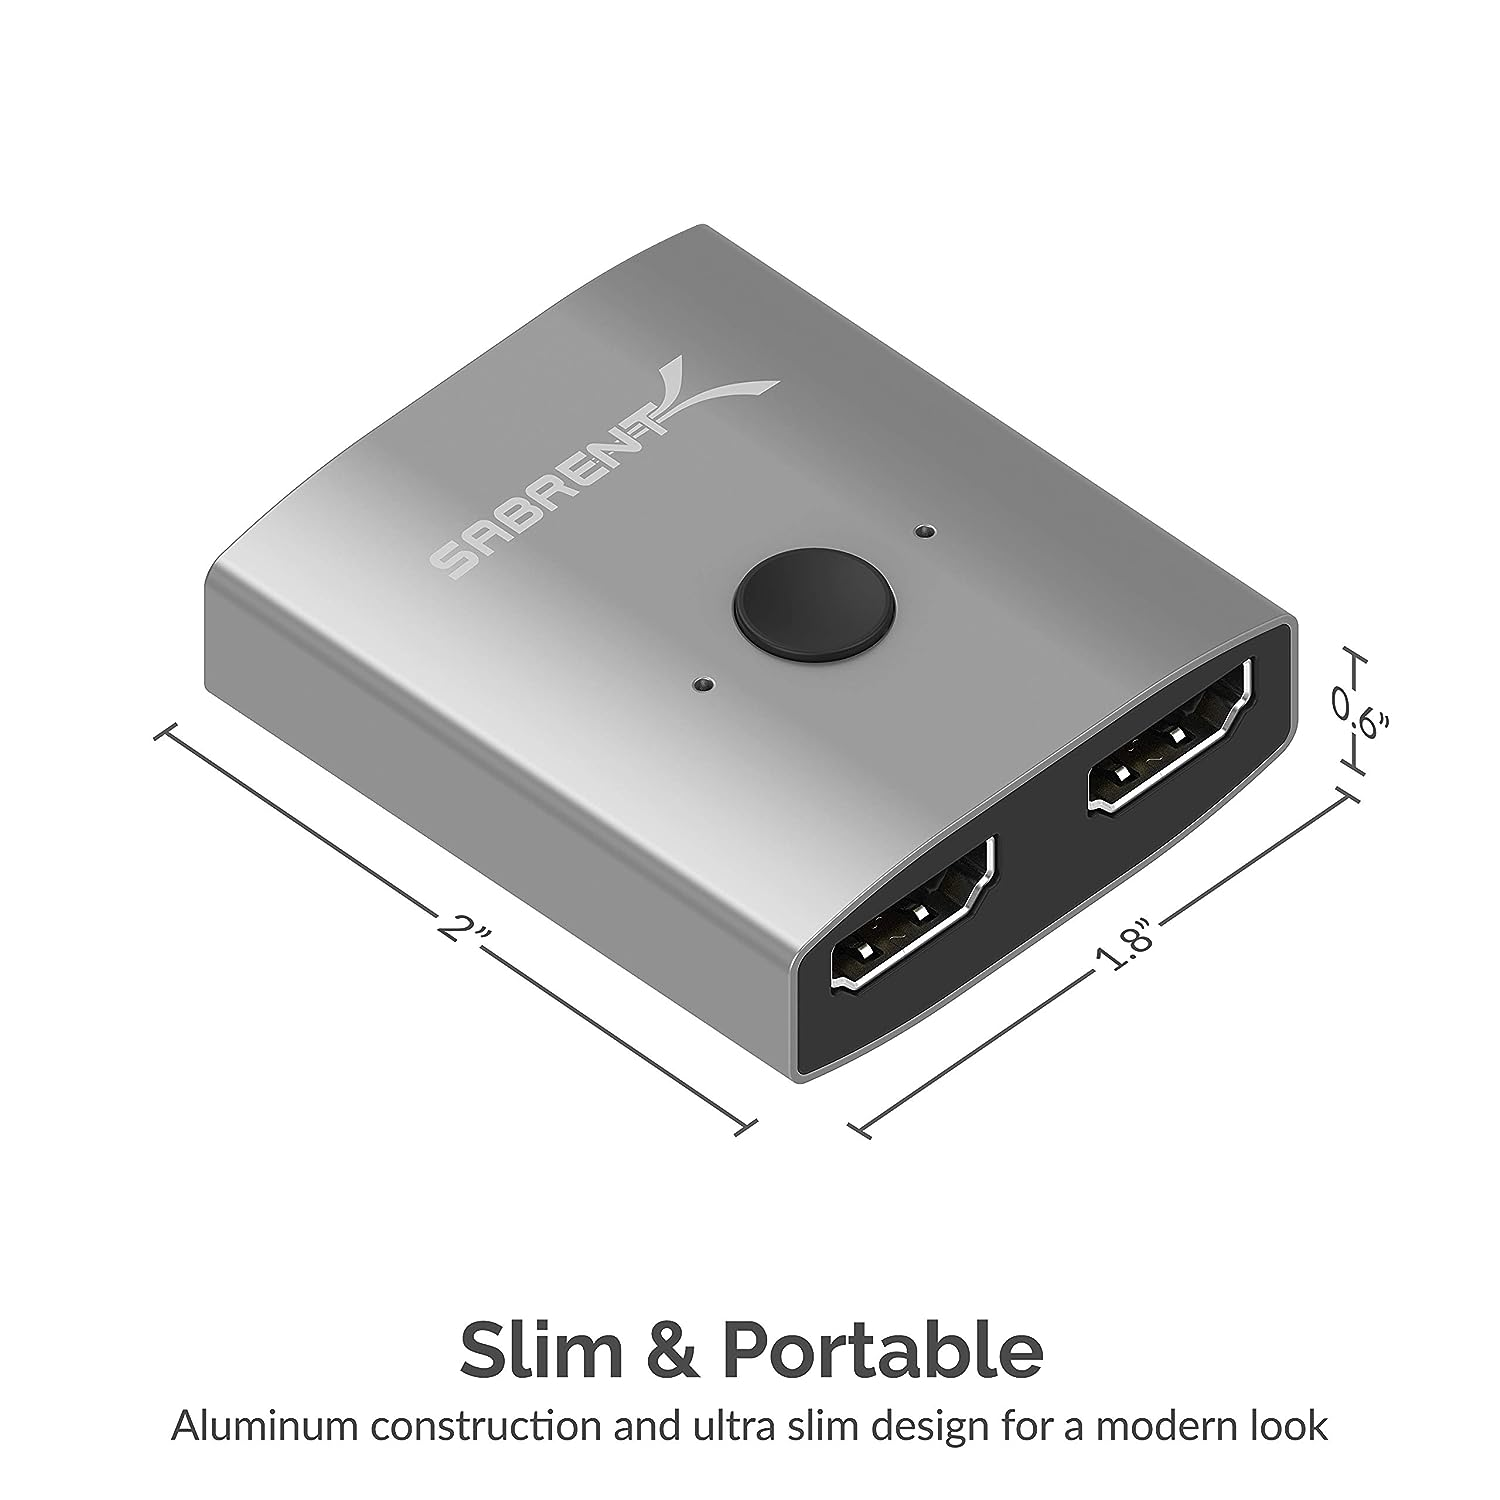 SABRENT 2 Input 1 Output 4K, 2K, and 3D Support Dual HDMI 2 Port Aluminum Sharing Switch, Supports HD for Xbox PS5/4/3/ Roku or HDTV Fire Stick (DA-HSW2)